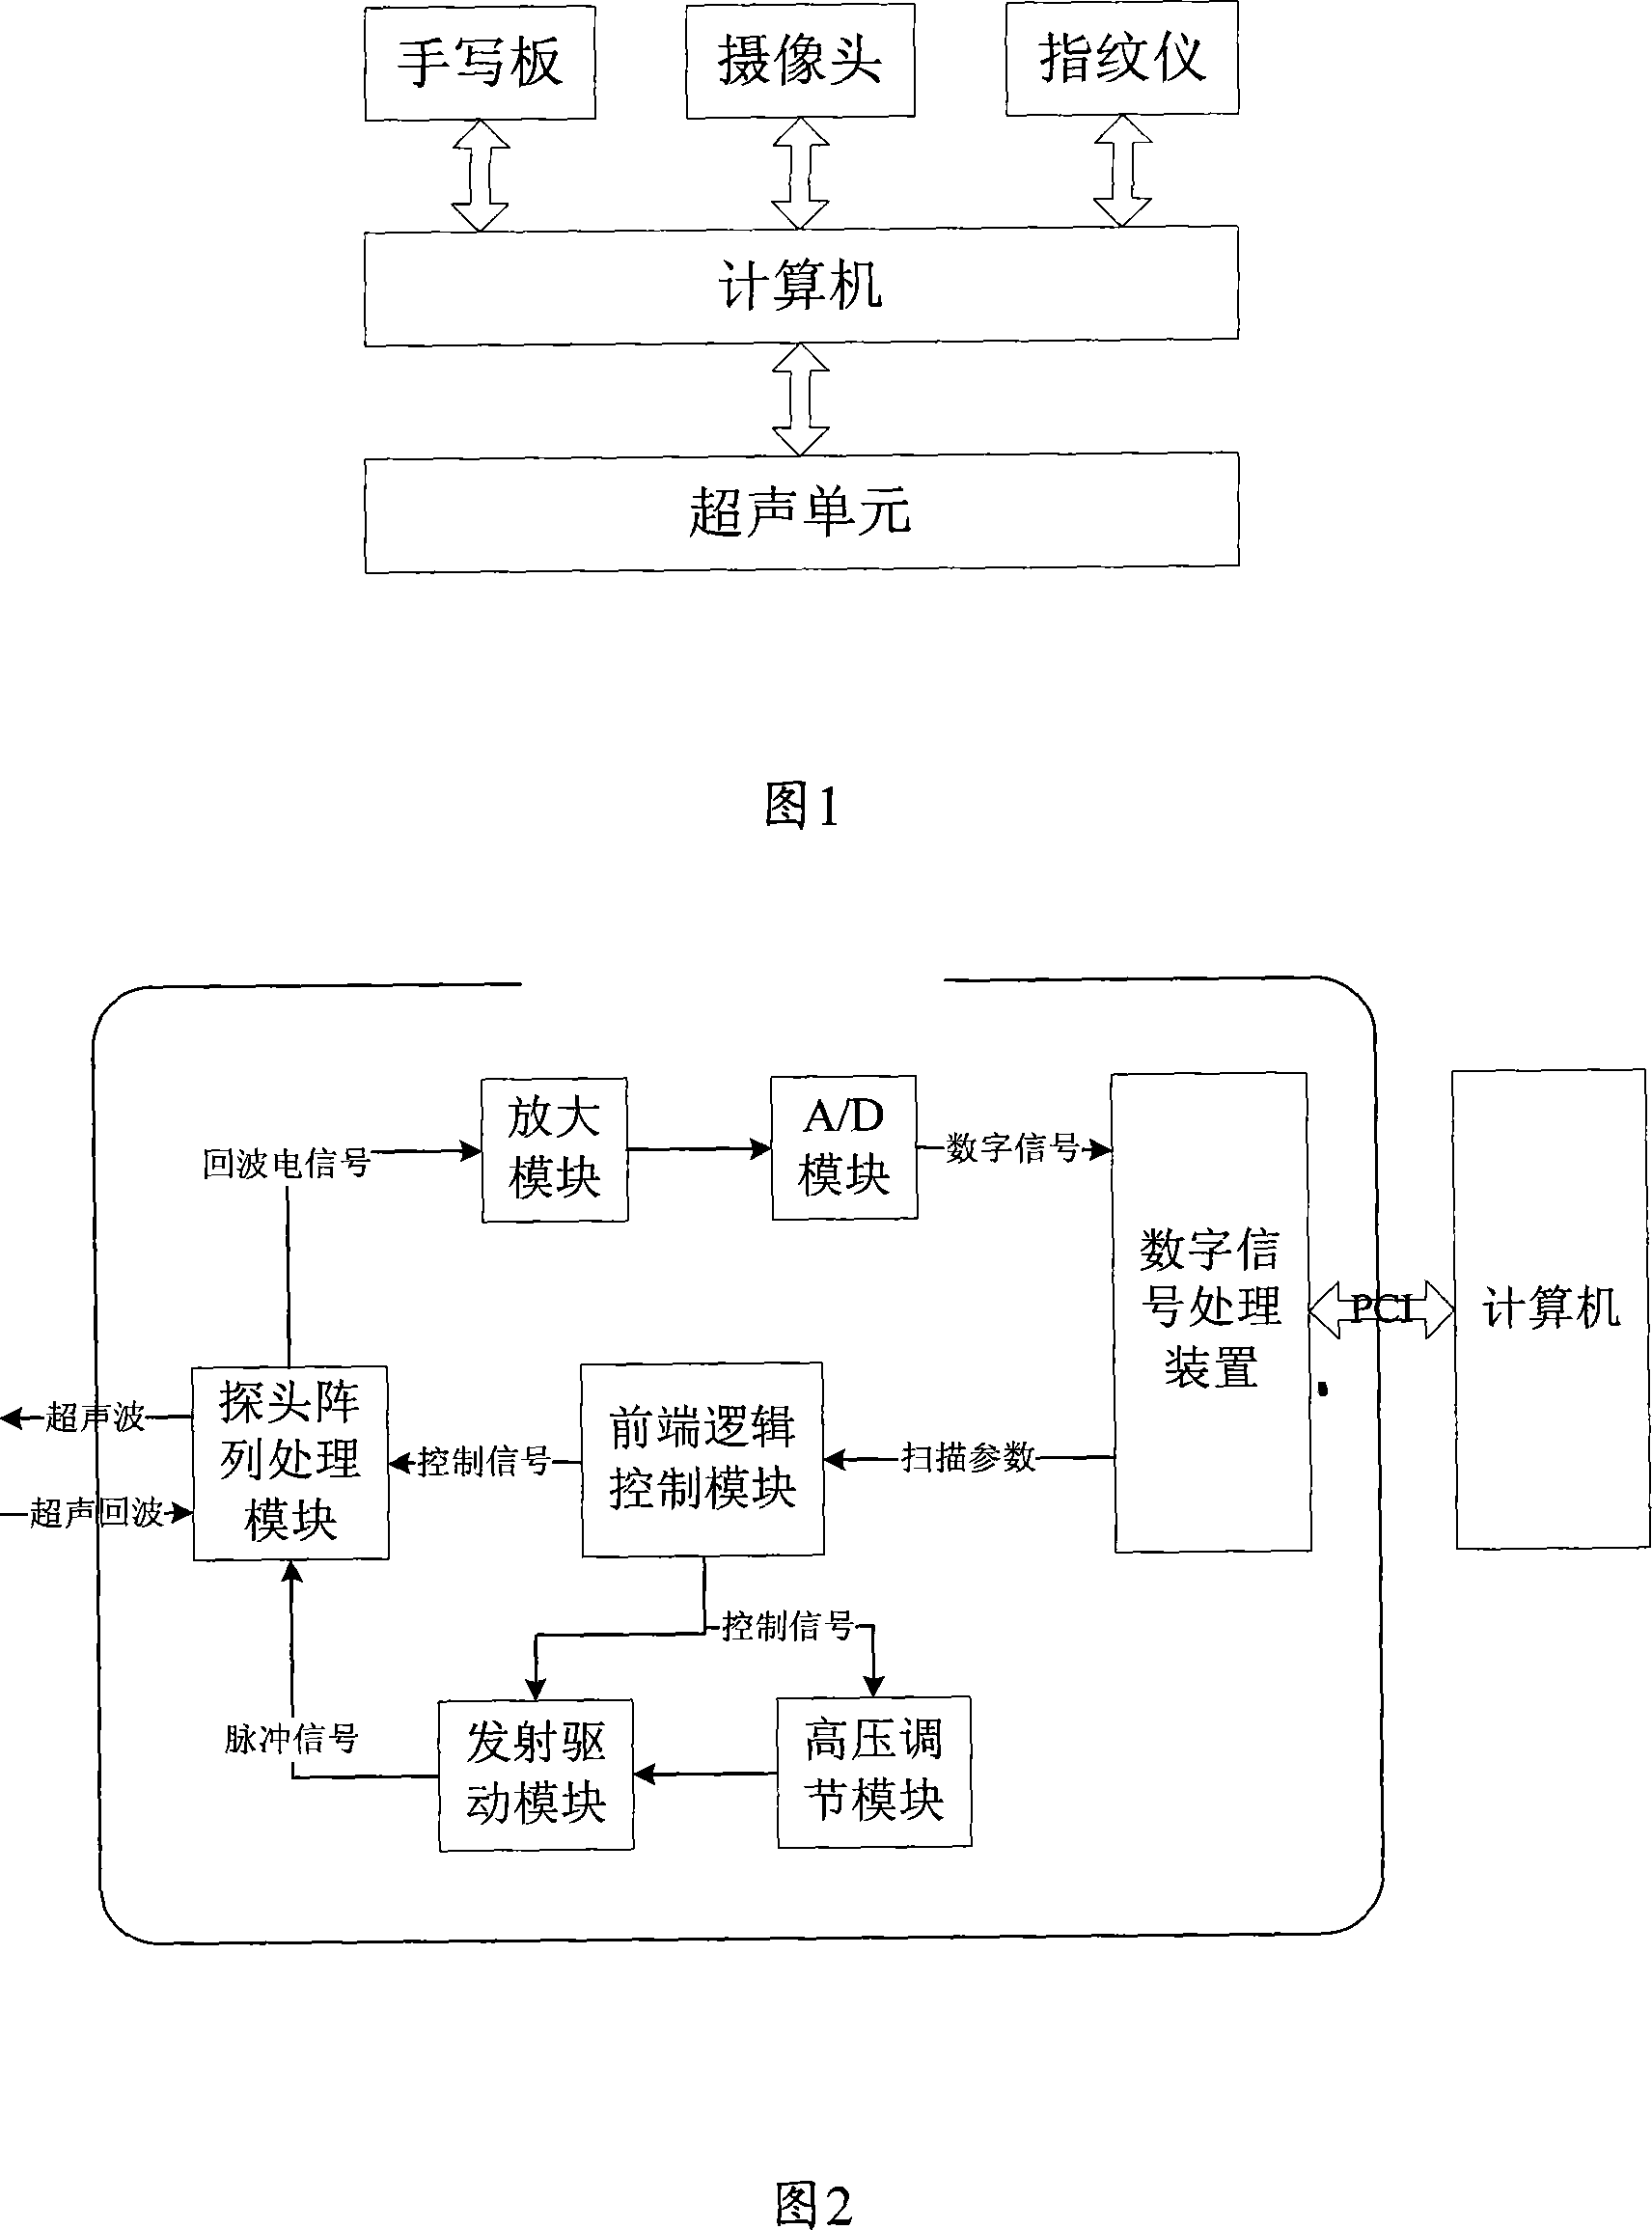 Digital family planing ultrasound system and data acquisition method